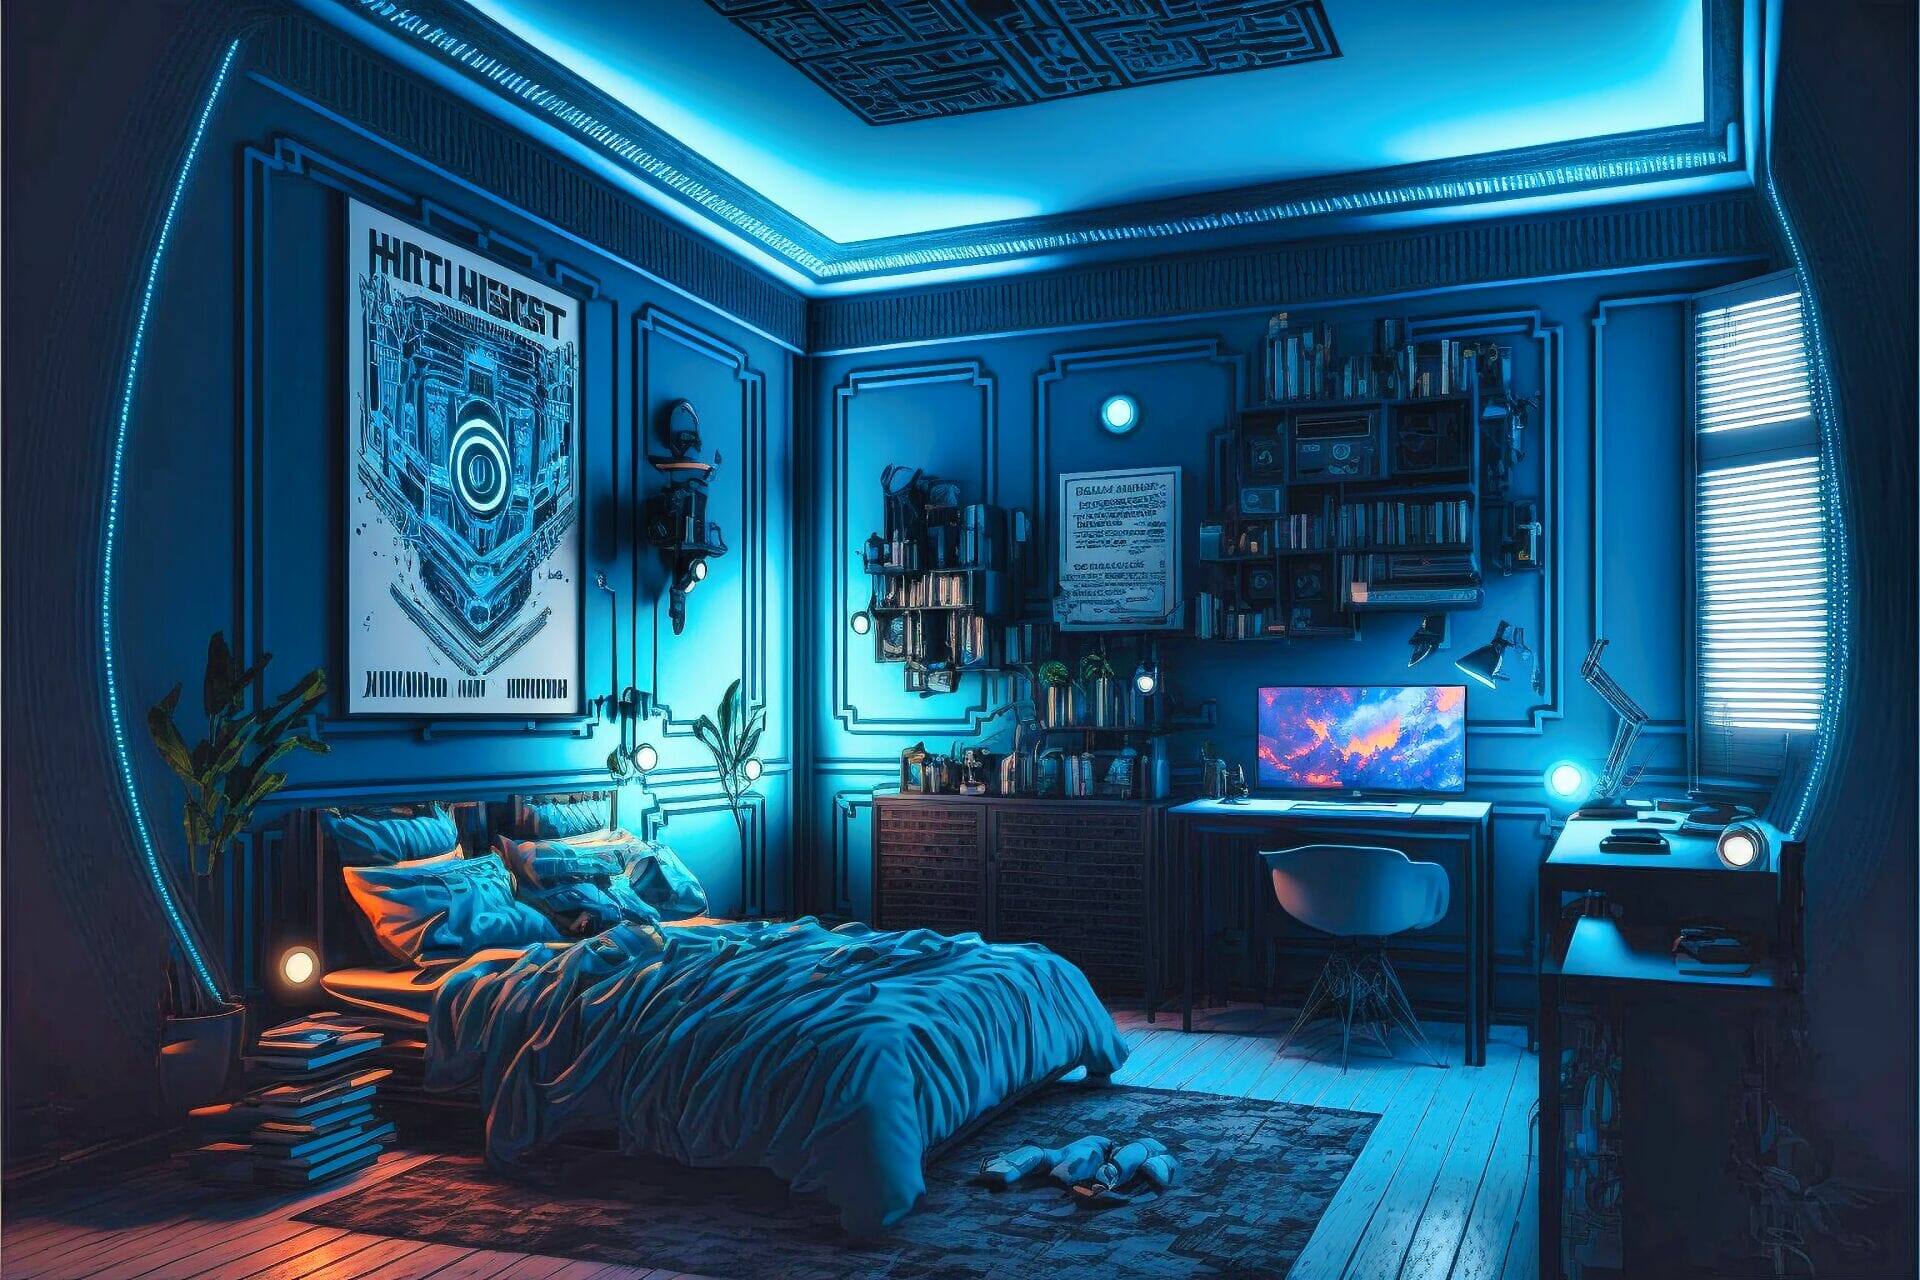 Bedroom With A Retro Cyberpunk Lounge Feel. The Walls Are Painted A Deep Electric Blue, With White Accents And Old-Fashioned Neon Lighting. The Center Of The Room Features A Large, Black Bed, With A Matching Bed Frame And Nightstands. The Lighting Is Low And Ambient, With A Light Strip Running Along The Walls, And A Retro Neon Bulb Providing The Main Lighting Source. The Floor Is An Industrial Tile With A Matte Finish.